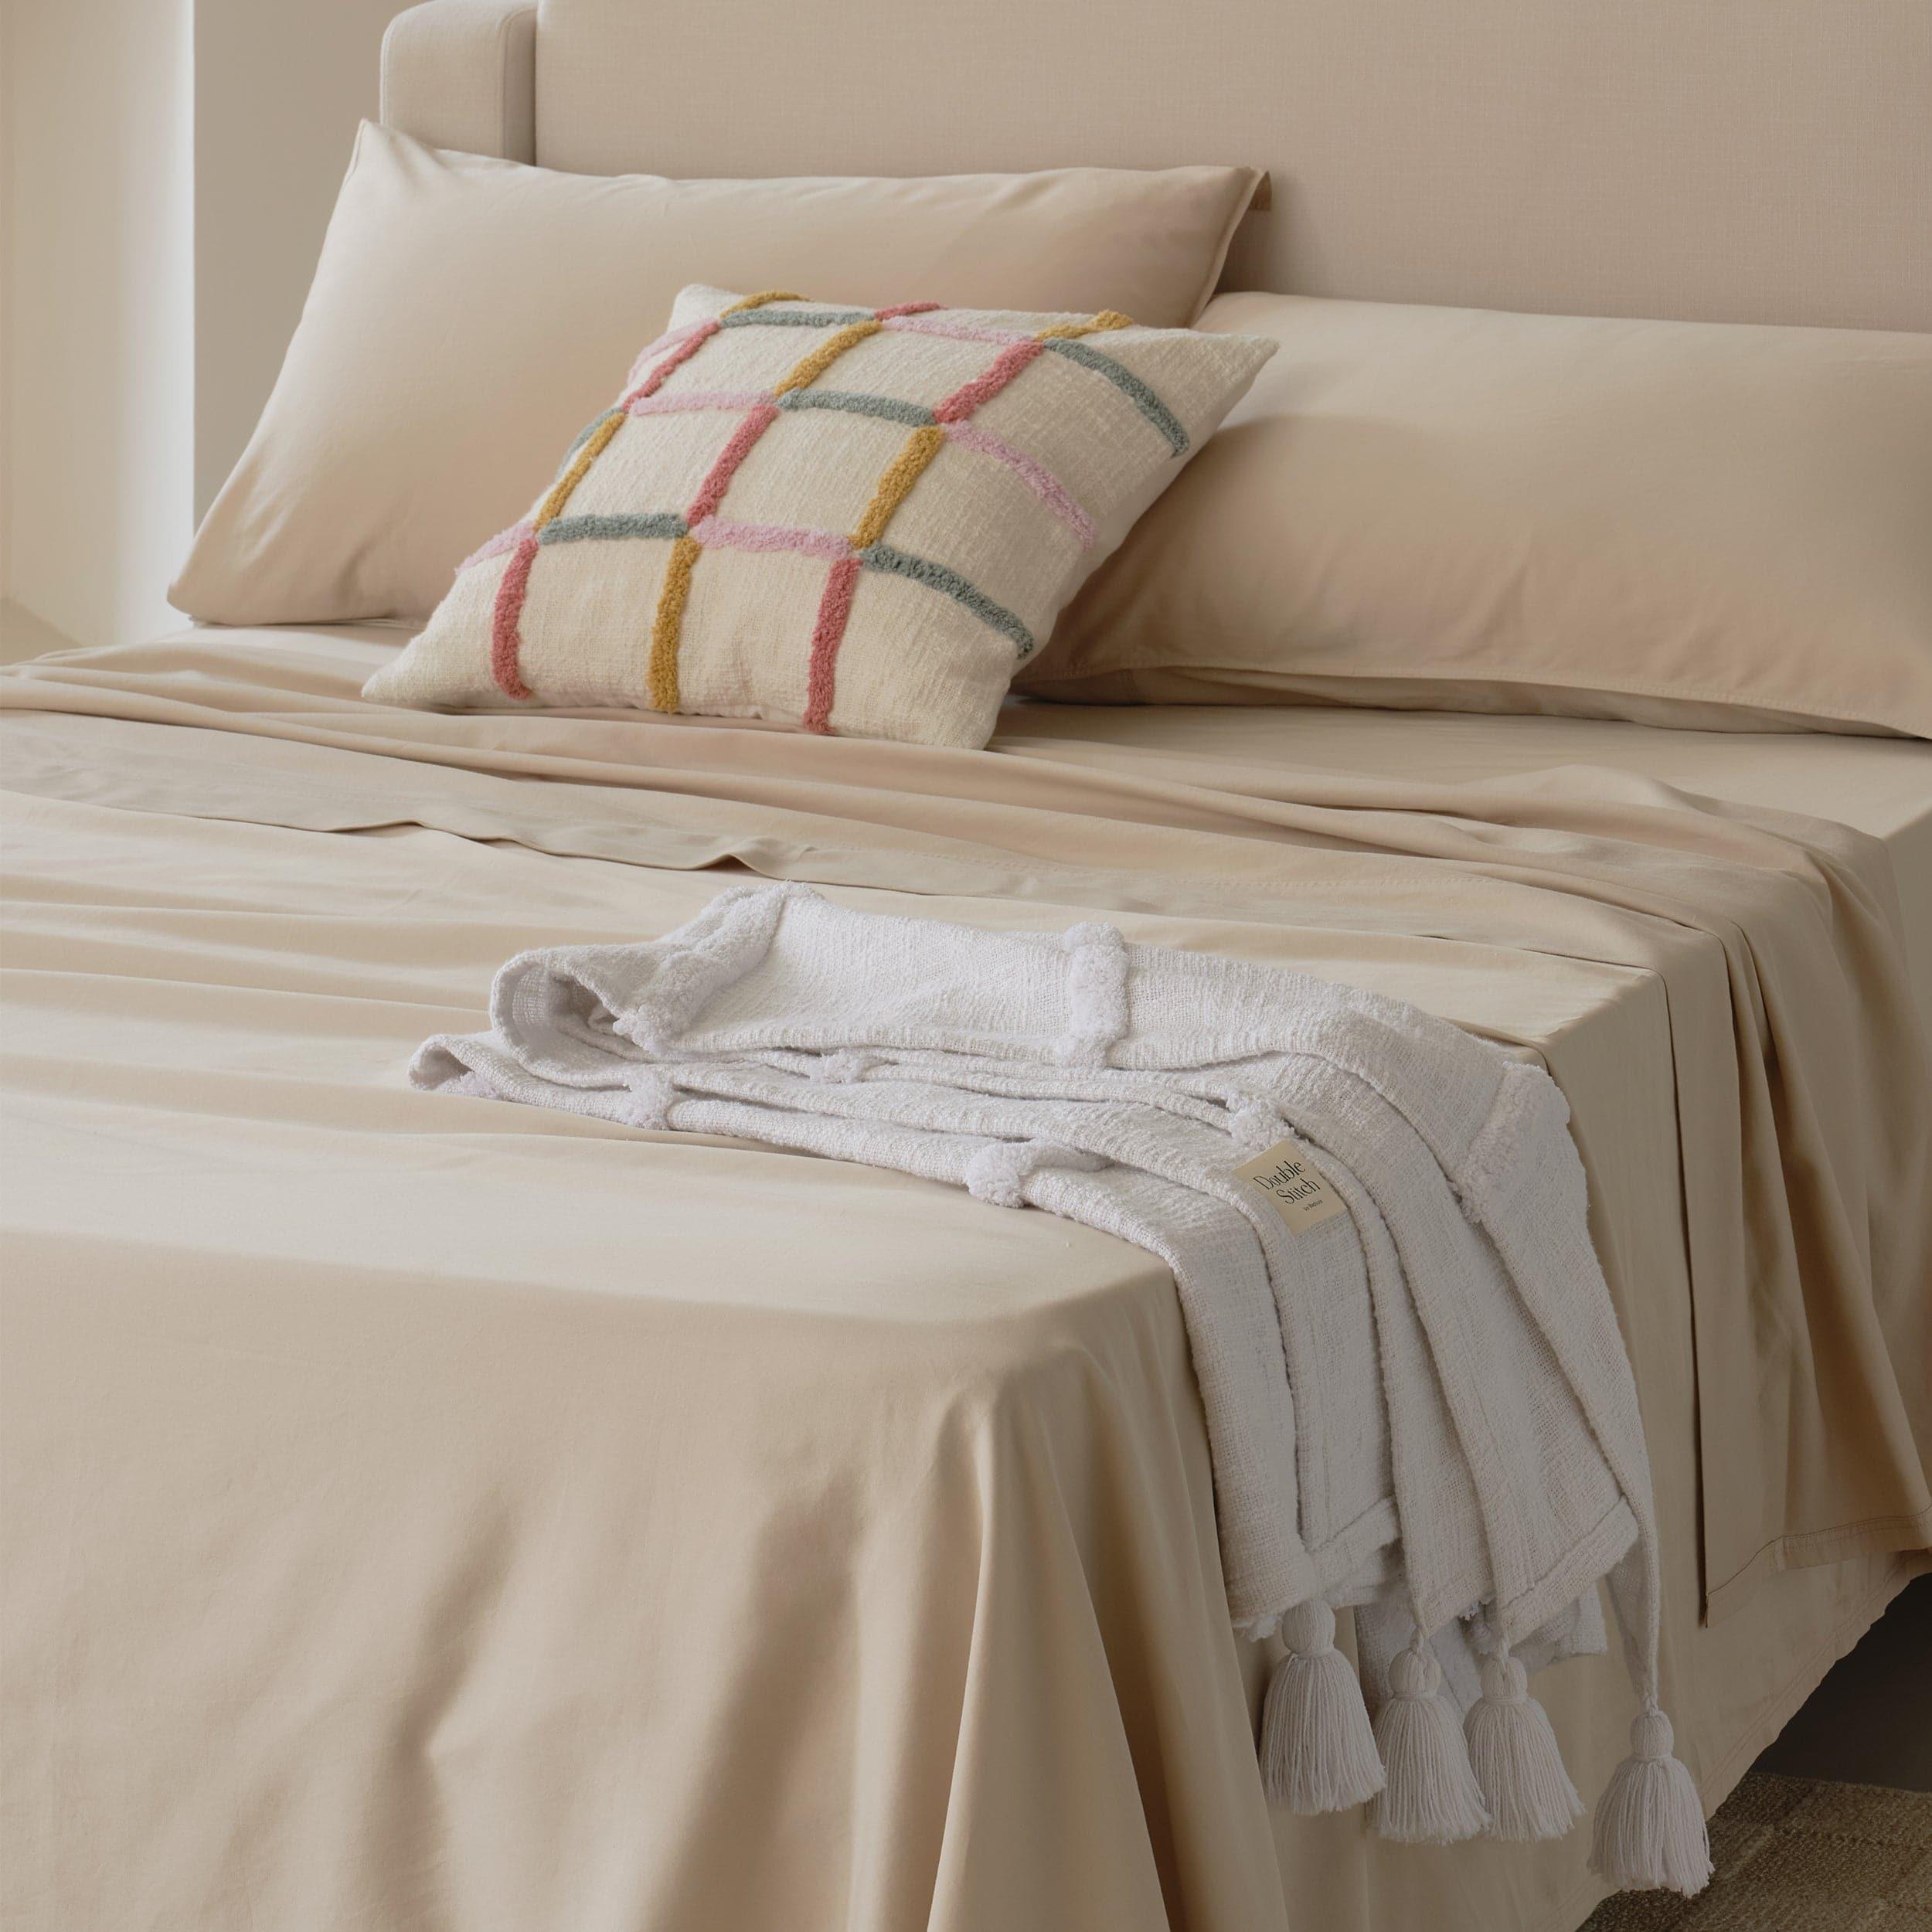 Complete your bedroom decor with our stylish king bed sheet sets, adding a touch of elegance to your space.